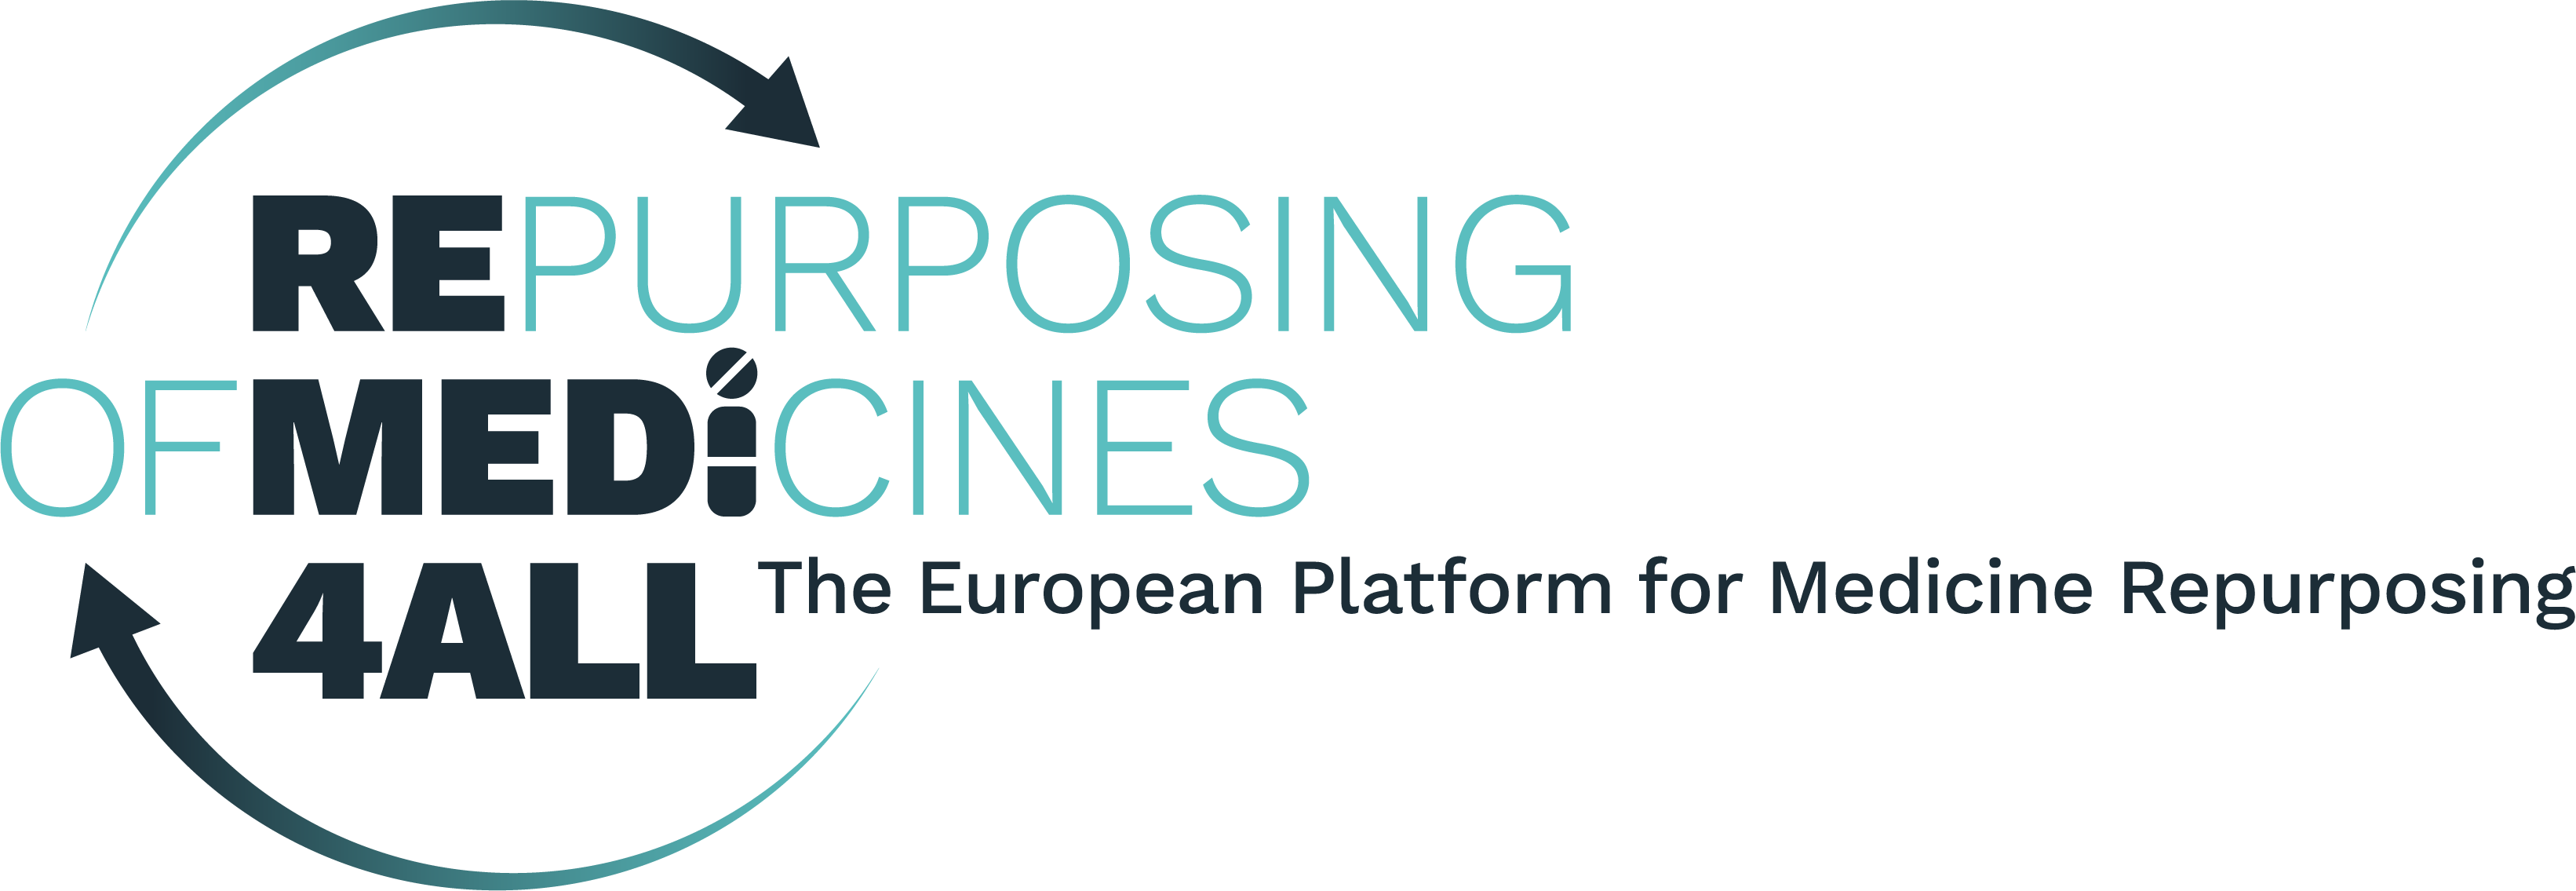 Chemotargets is a partner in REMEDi4ALL, an ambitious EU-funded research initiative, to drive forward the repurposing of medicines in Europe